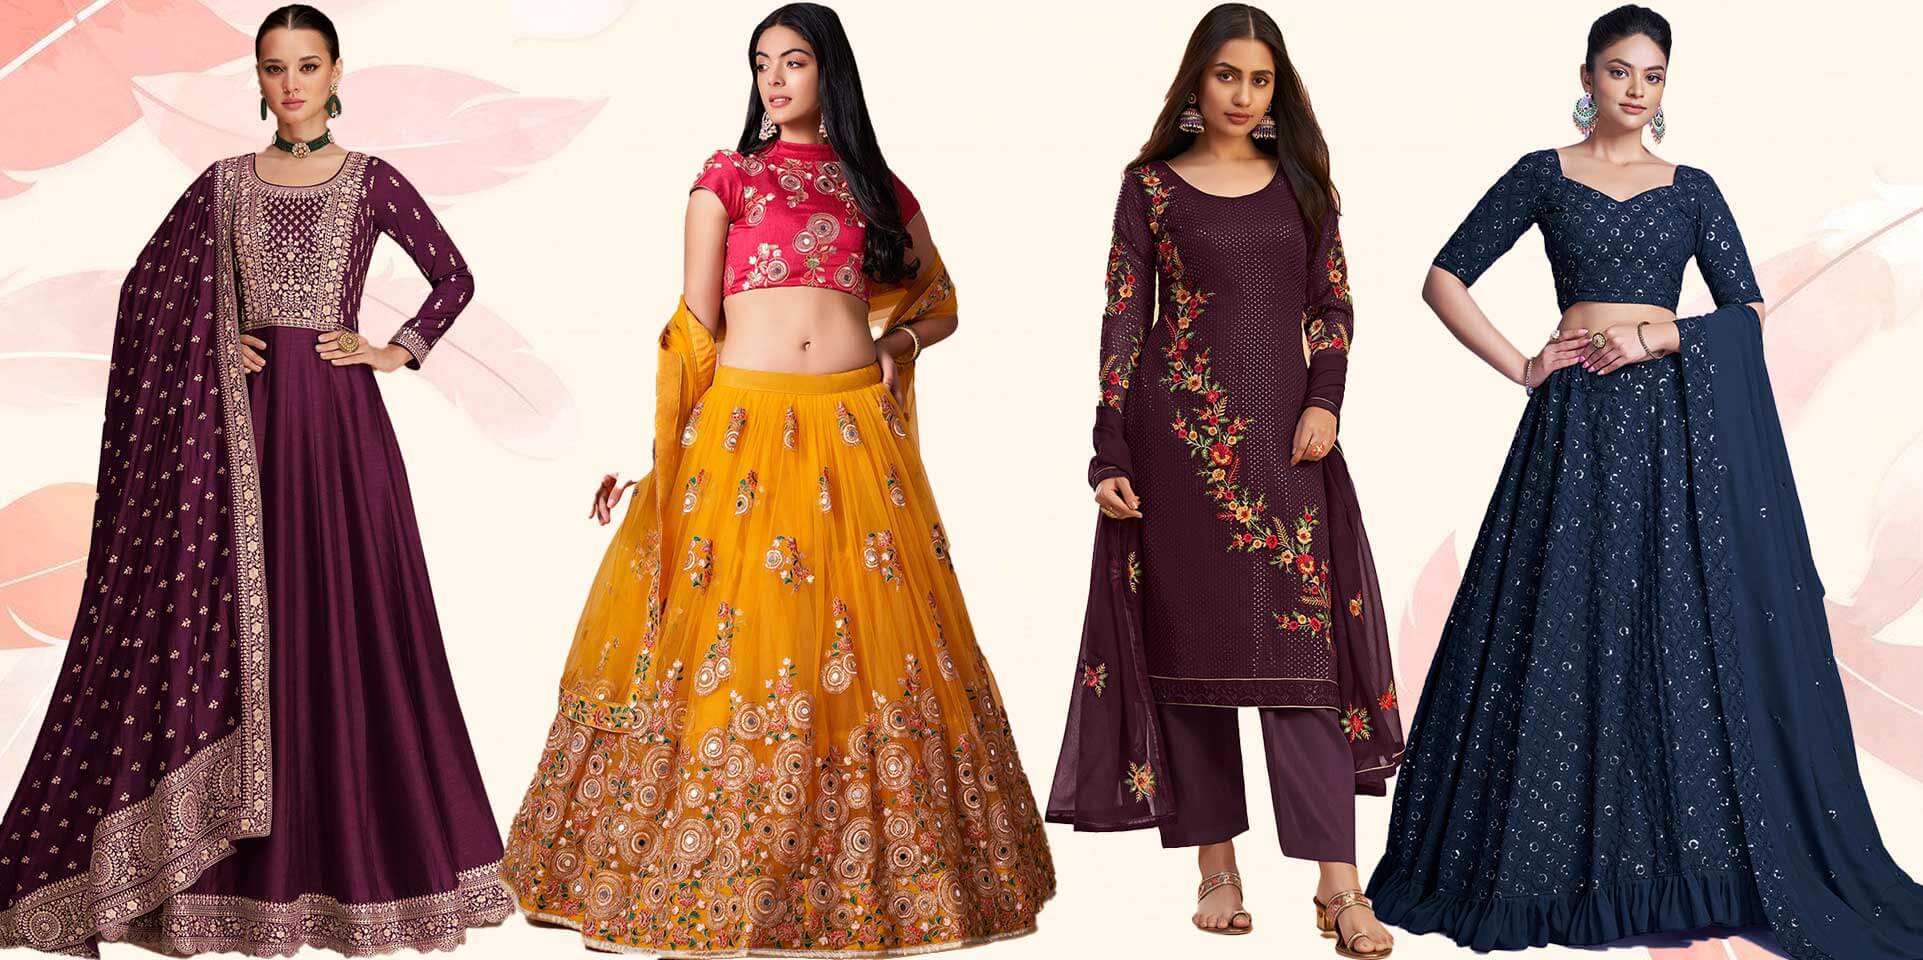 Best place to buy Indian wedding outfits for women to buy online outside of India 